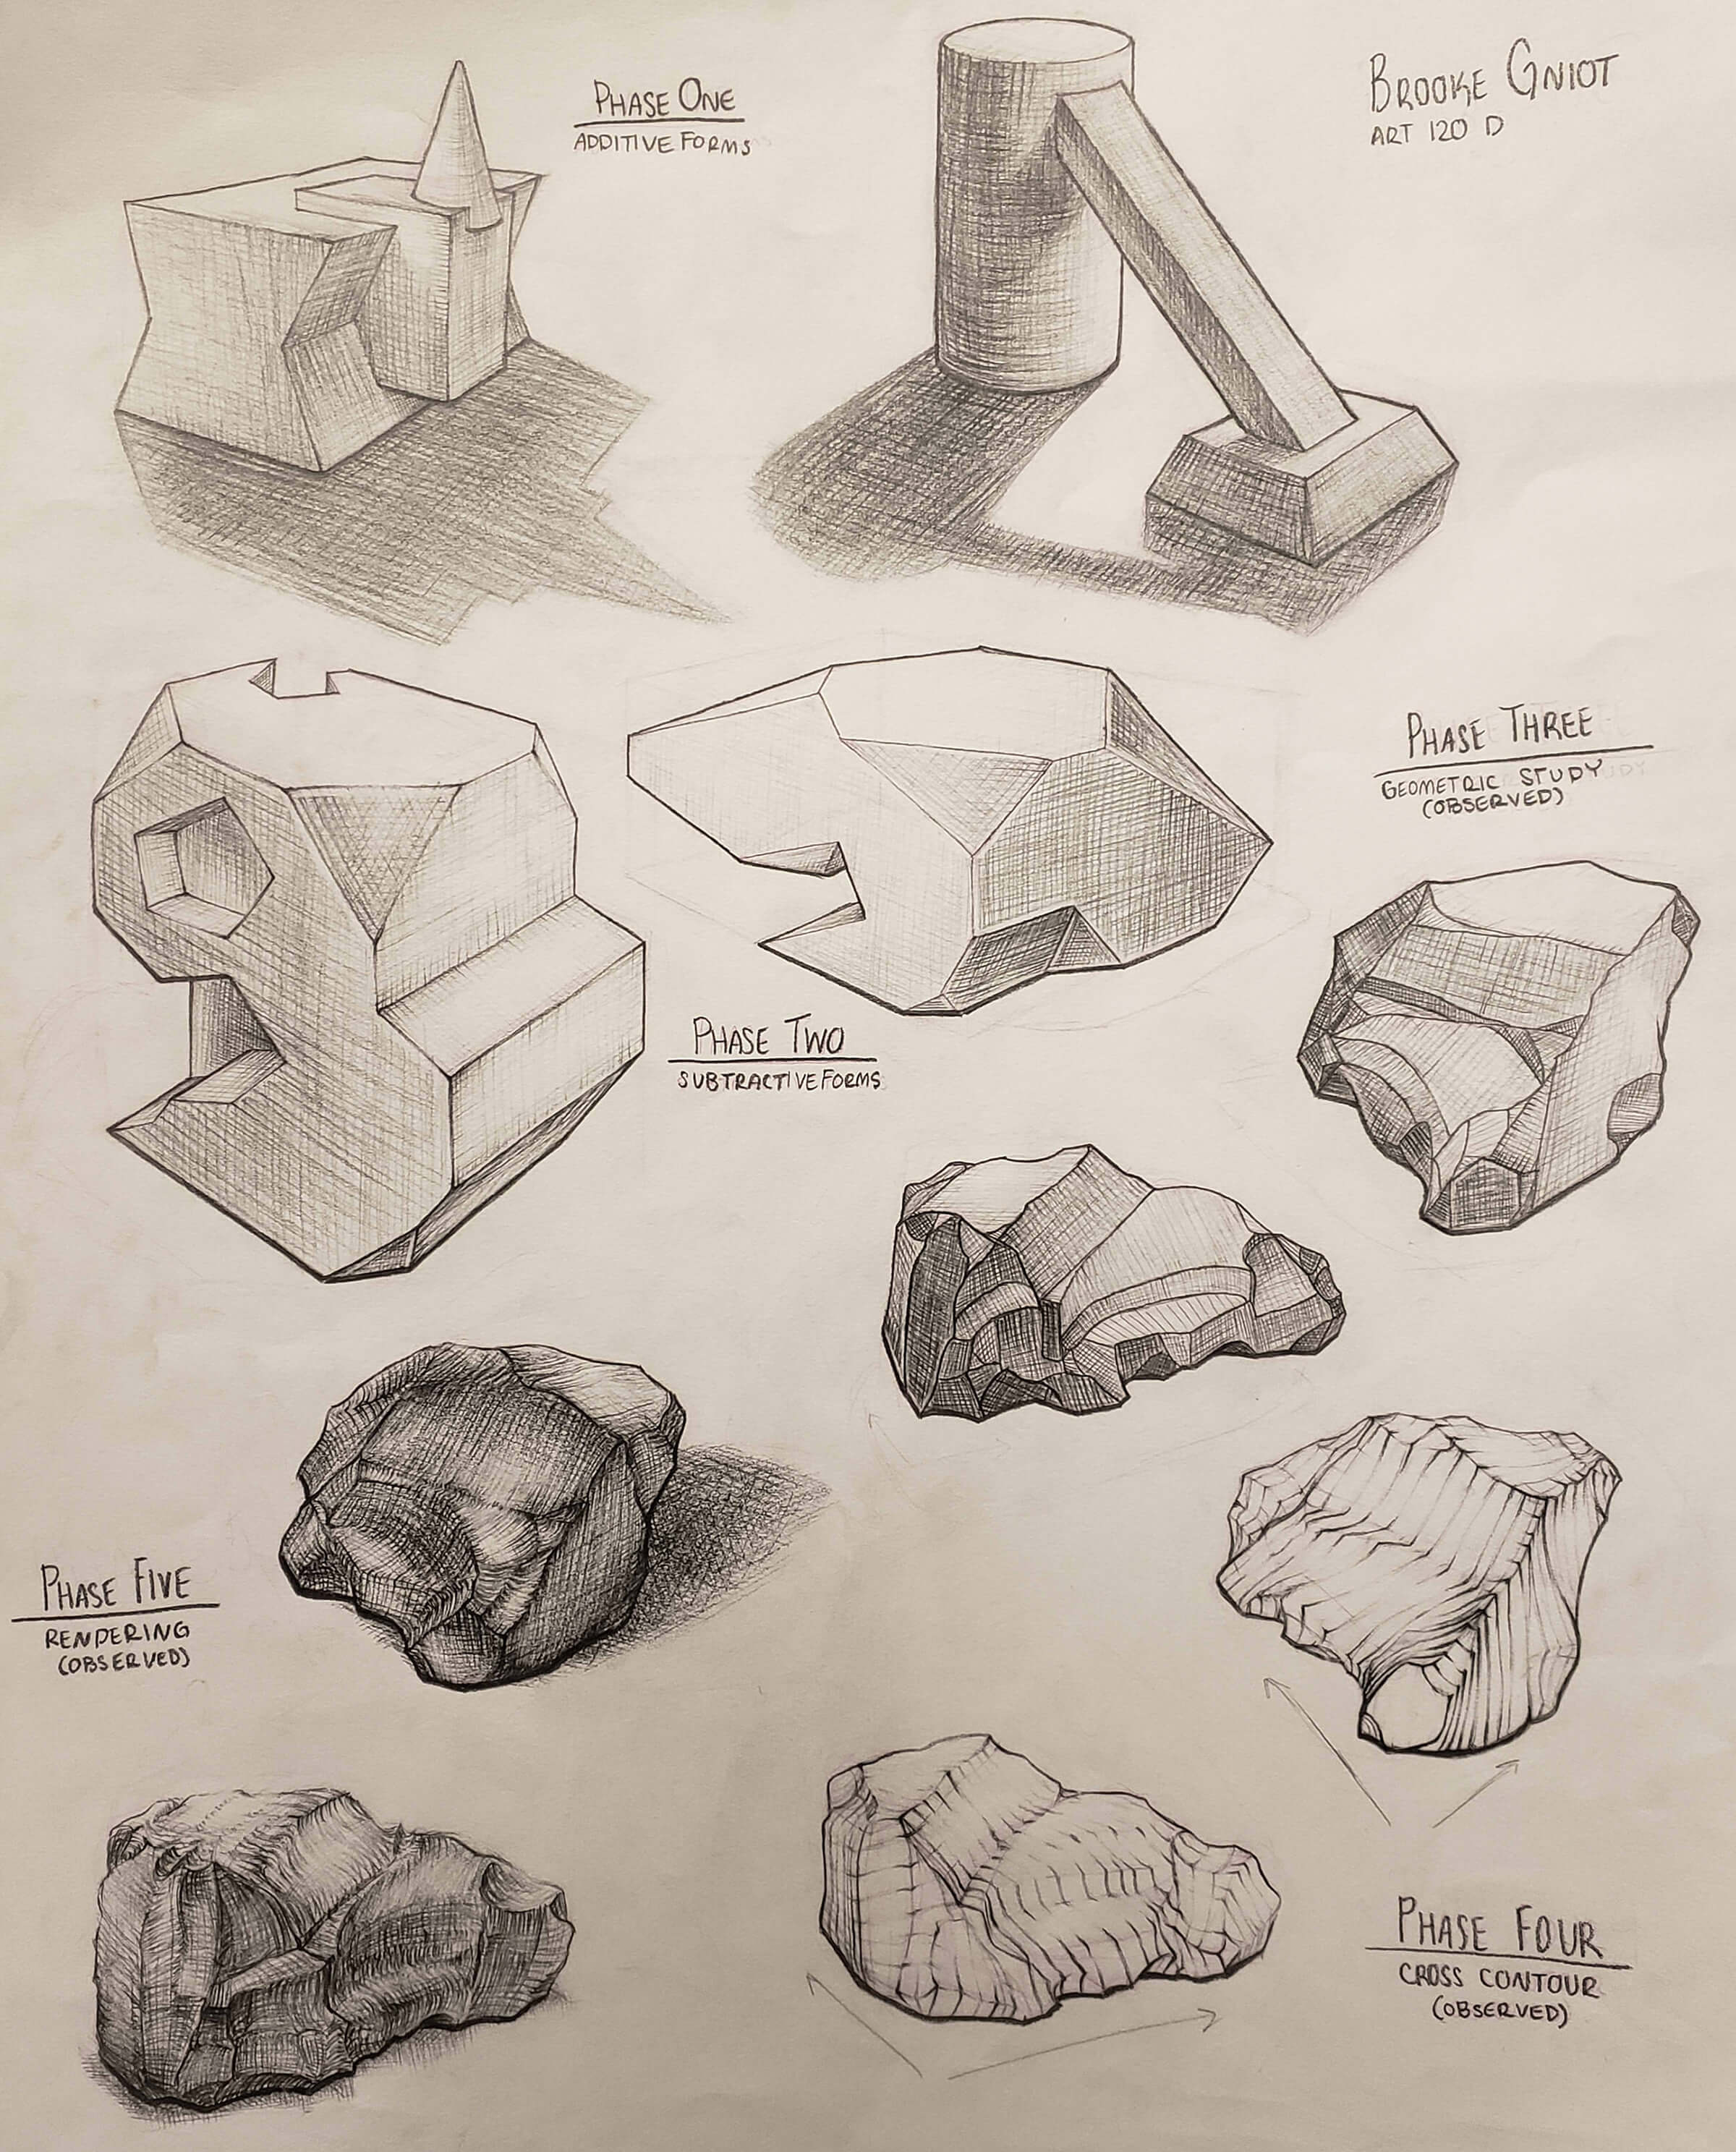 Several pencil drawings of rocks and geometric shapes